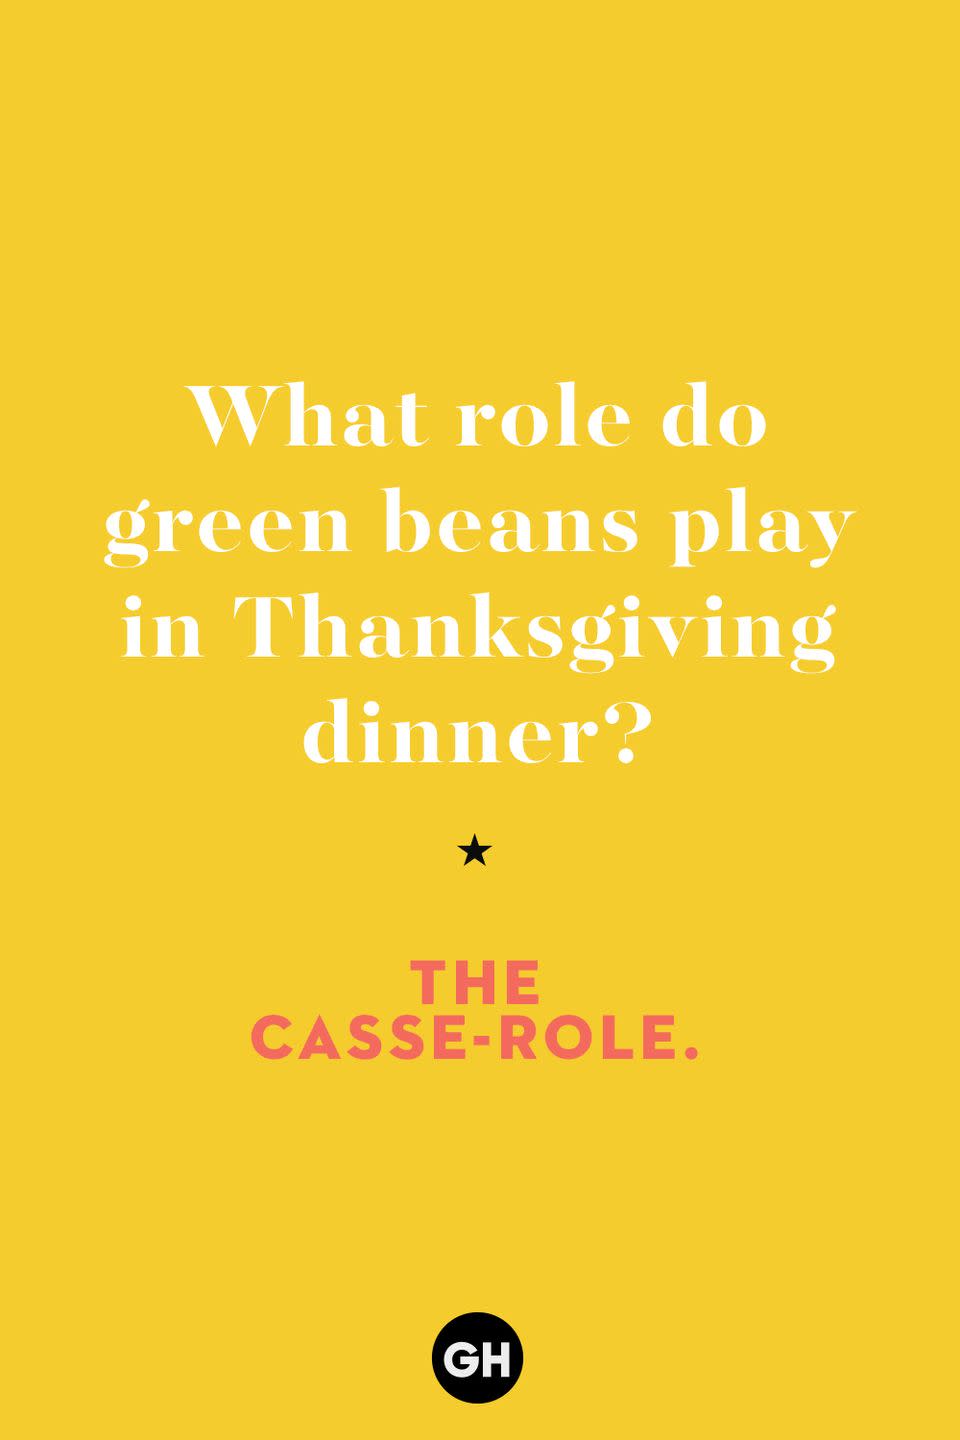 26) What role do green beans play in Thanksgiving dinner?